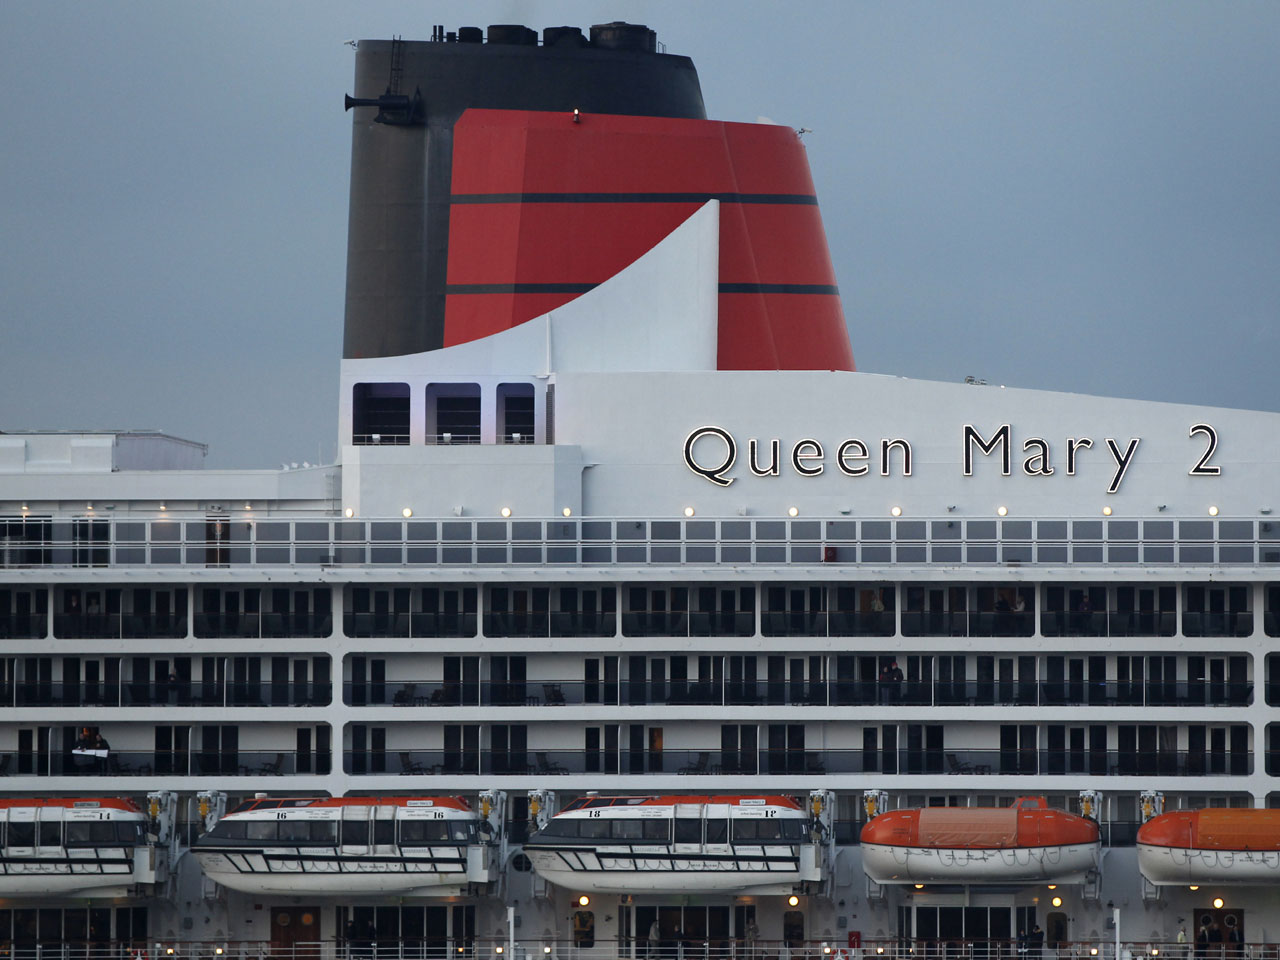 Illness wanes on Queen Mary 2 cruise ship with 200 sickened passengers